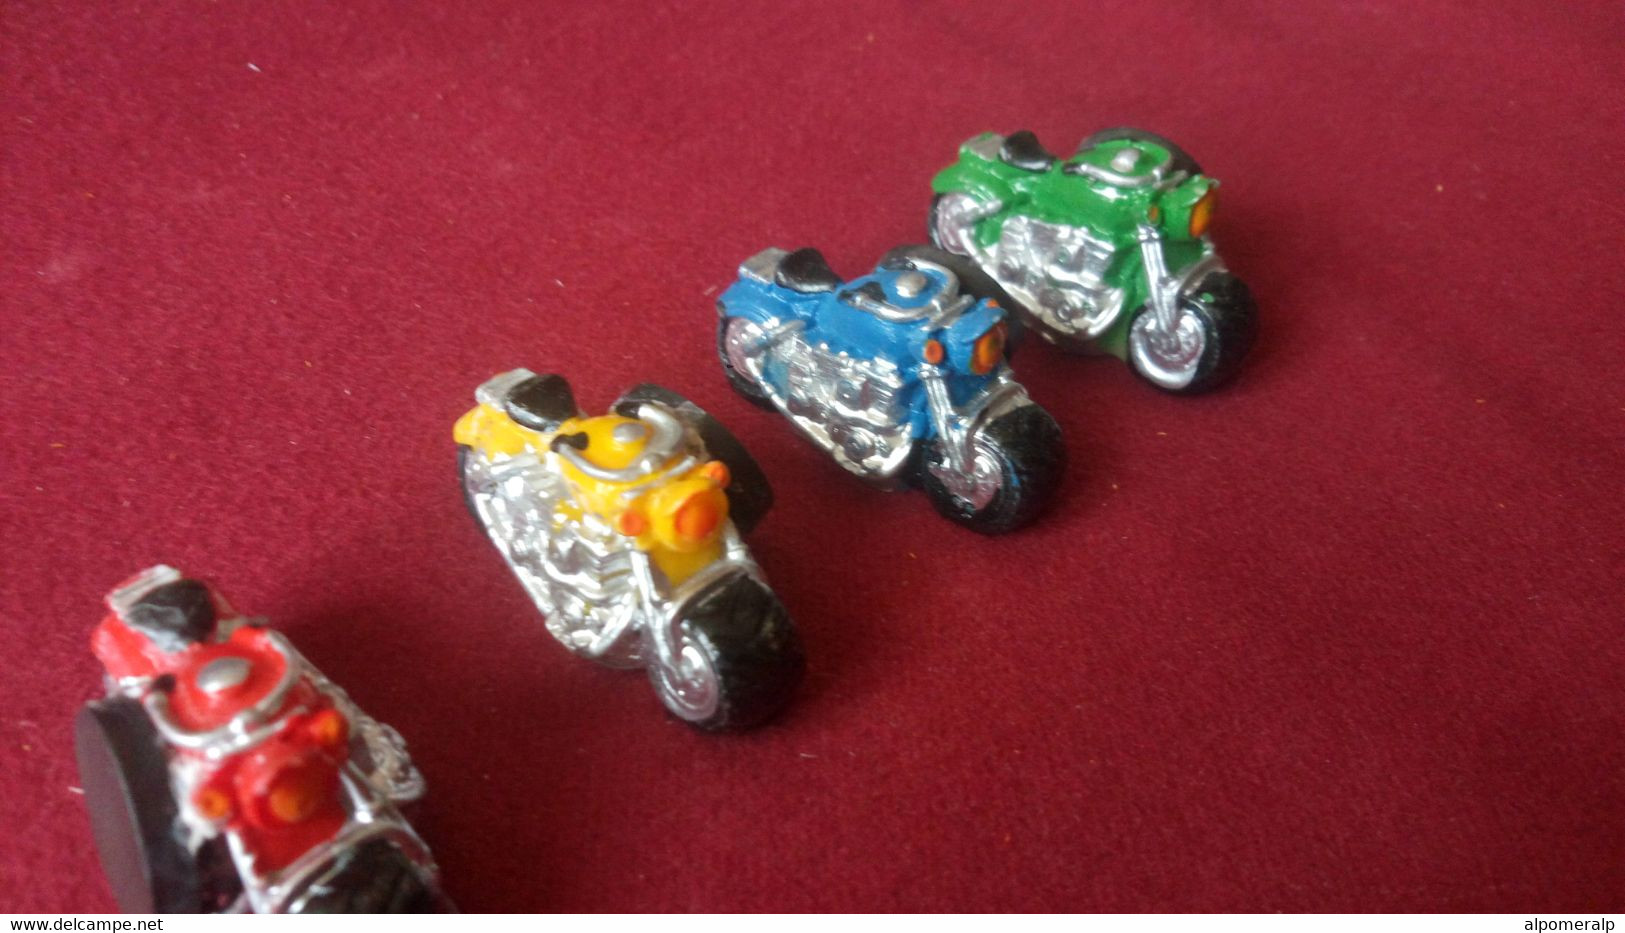 Magnet, Motorcycles, 4 pieces in 4 different colors, 4 x 2,3 cm